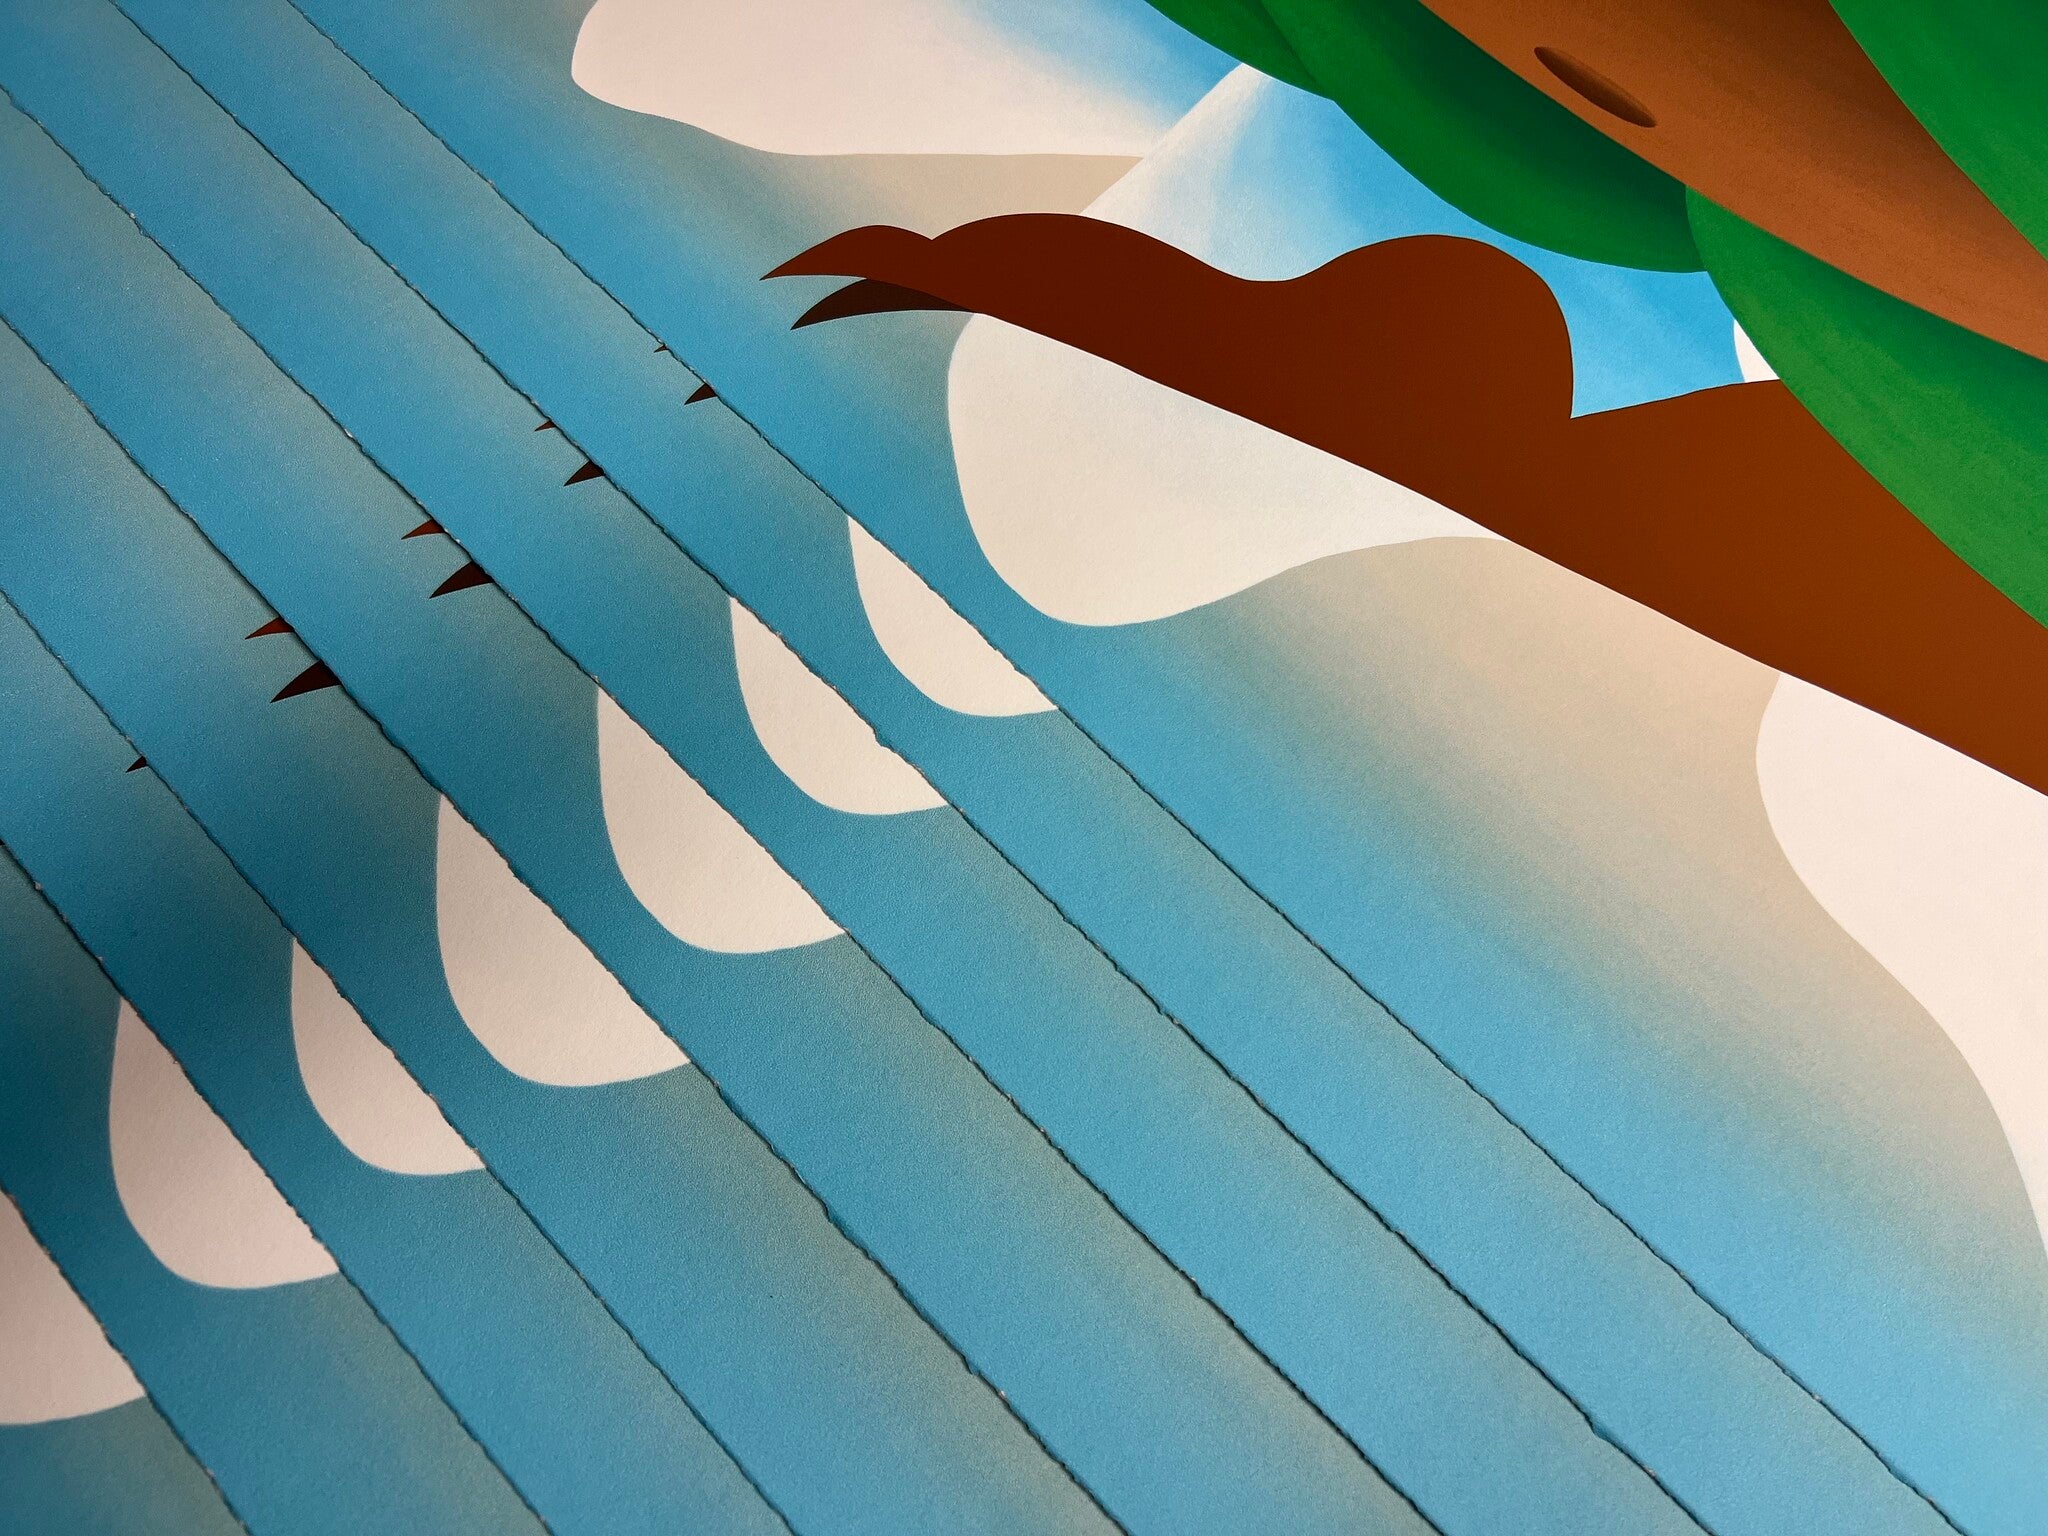 detail of Bianca Nemelc print fanned out - image shows blue sky, mountains and a rounded brown belly and foot pointed at sky